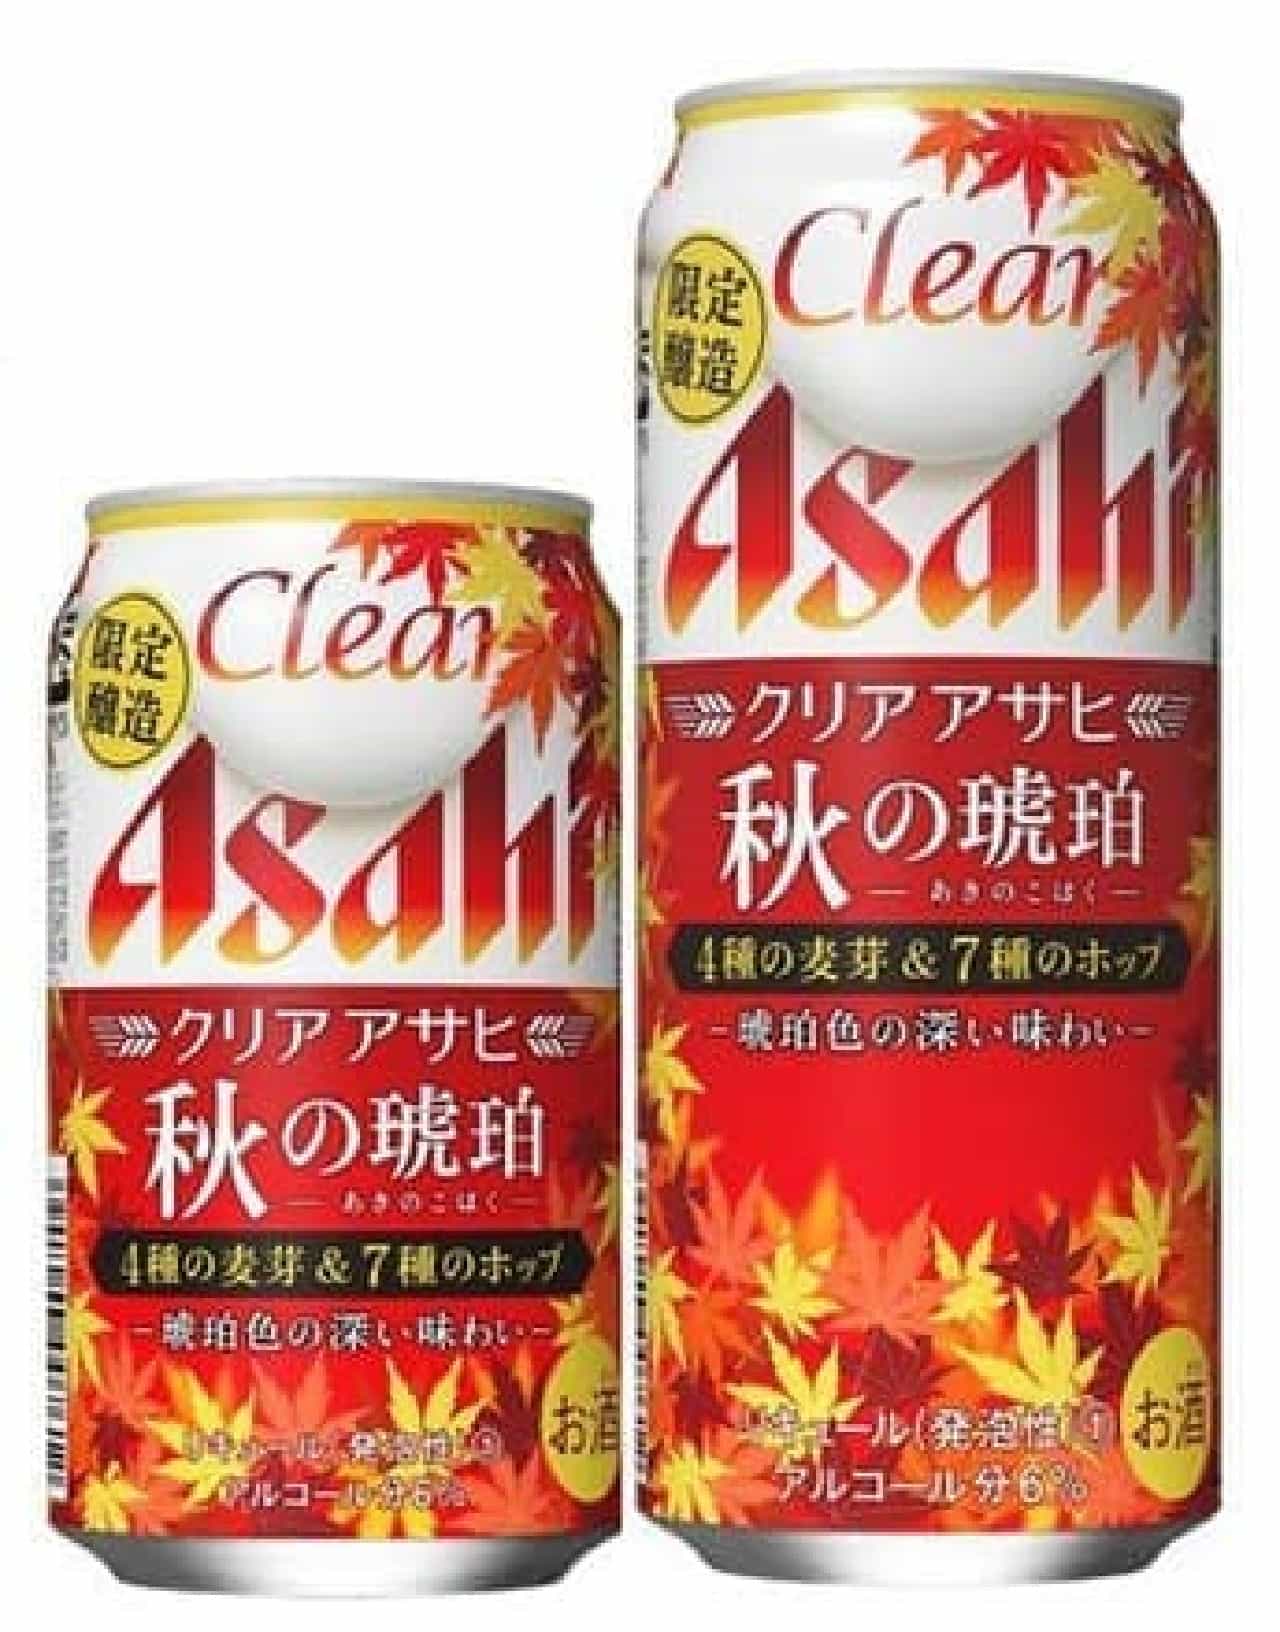 "Clear Asahi" is also available for autumn